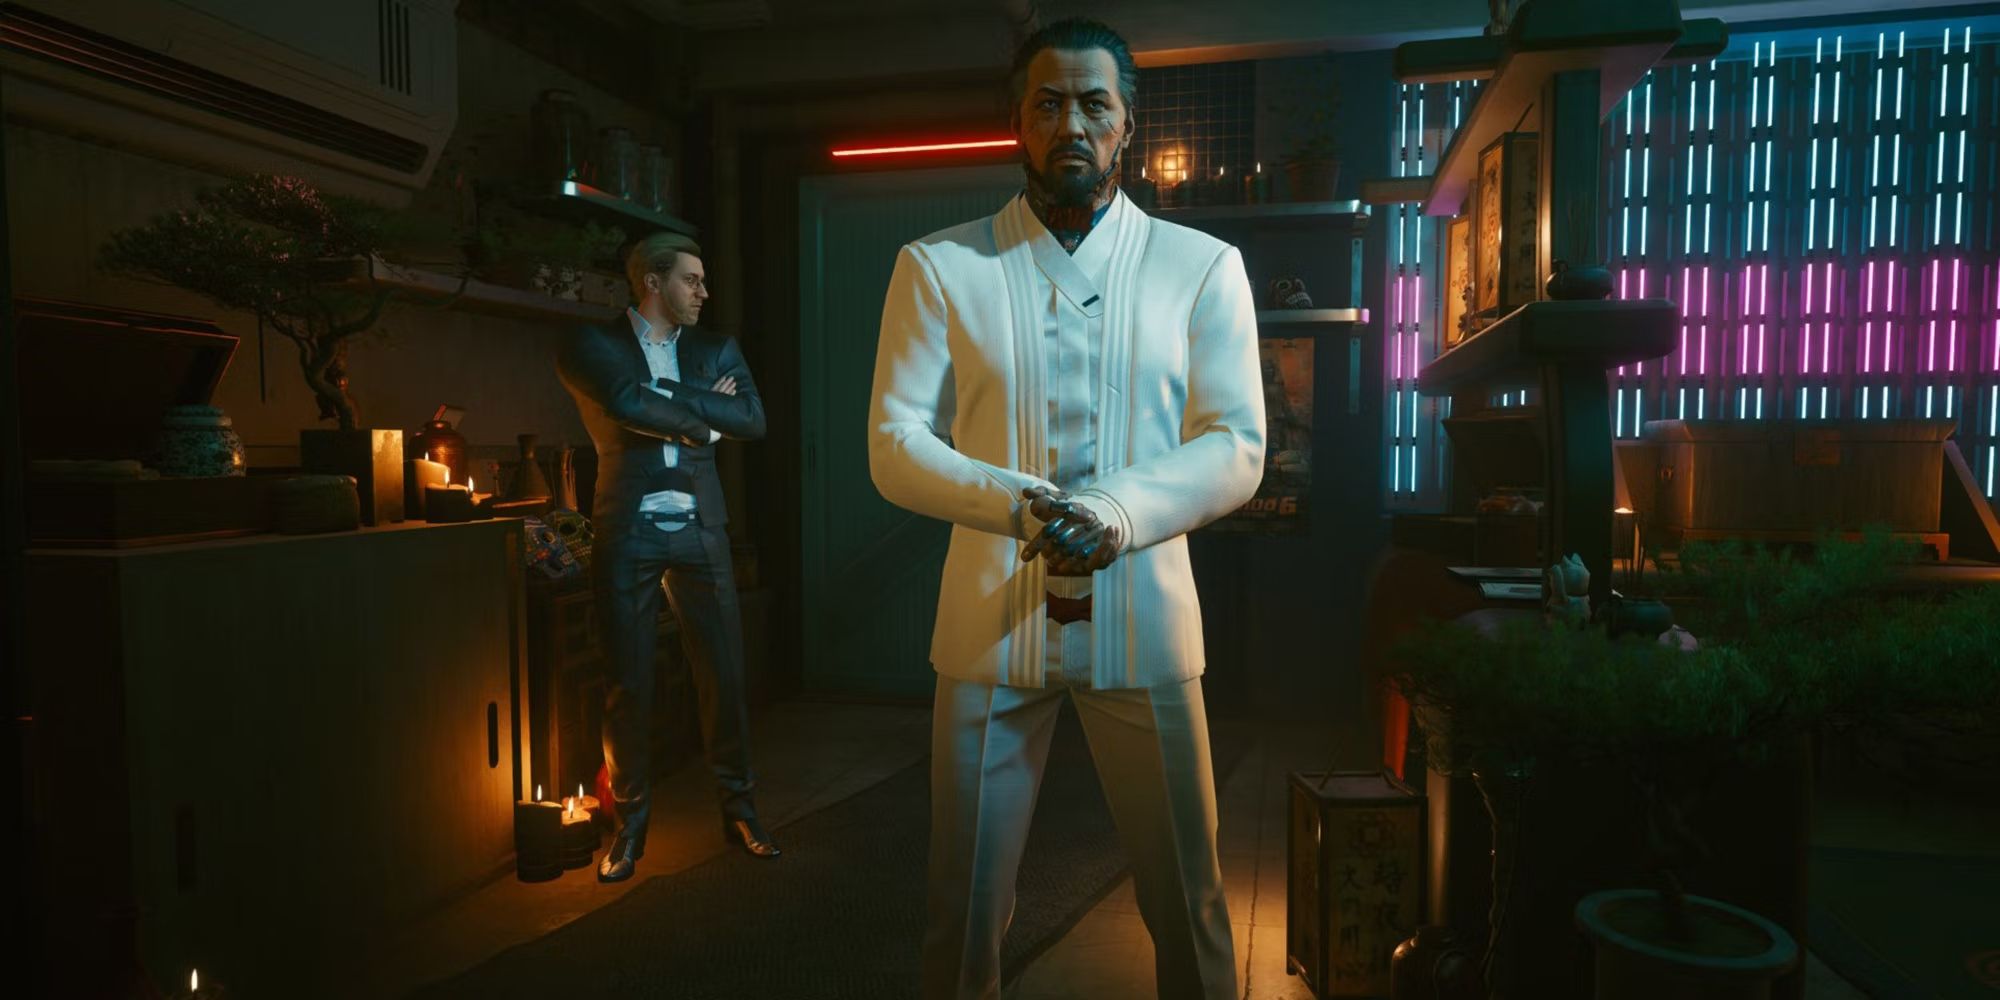 Cyberpunk 2077's Goro Takemura stands in a candlelit room with neon lights.